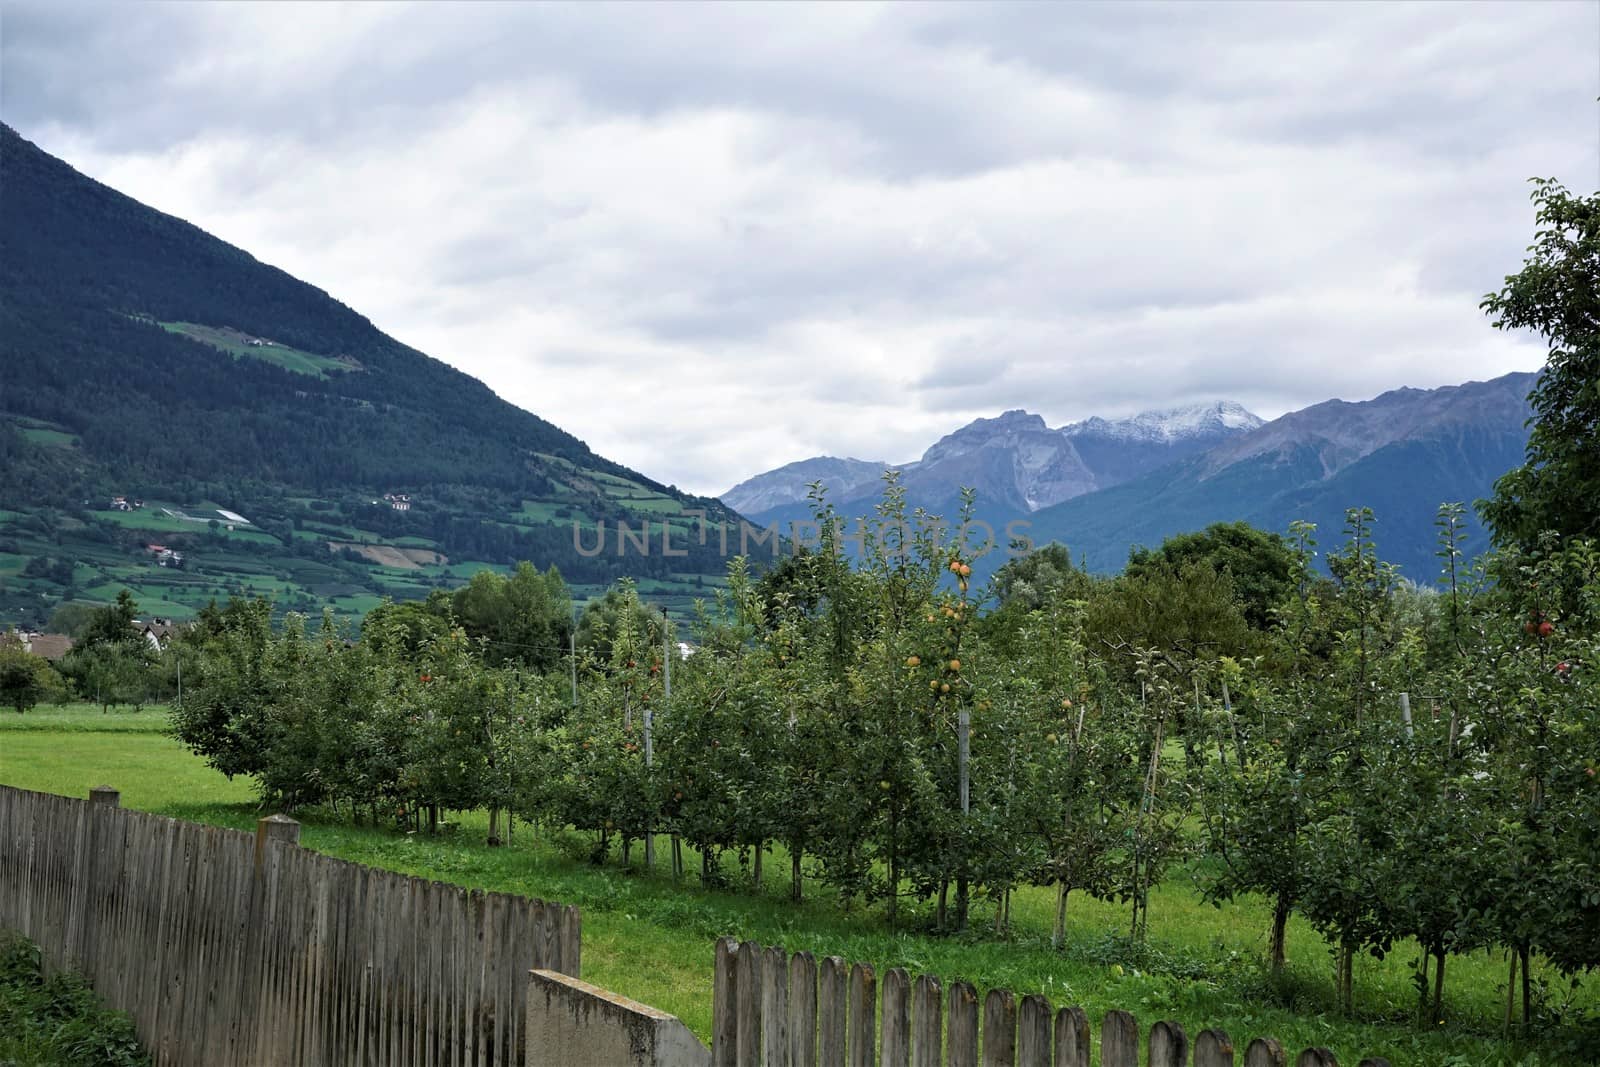 View to a mountain range with apple trees near Glurns, Italy